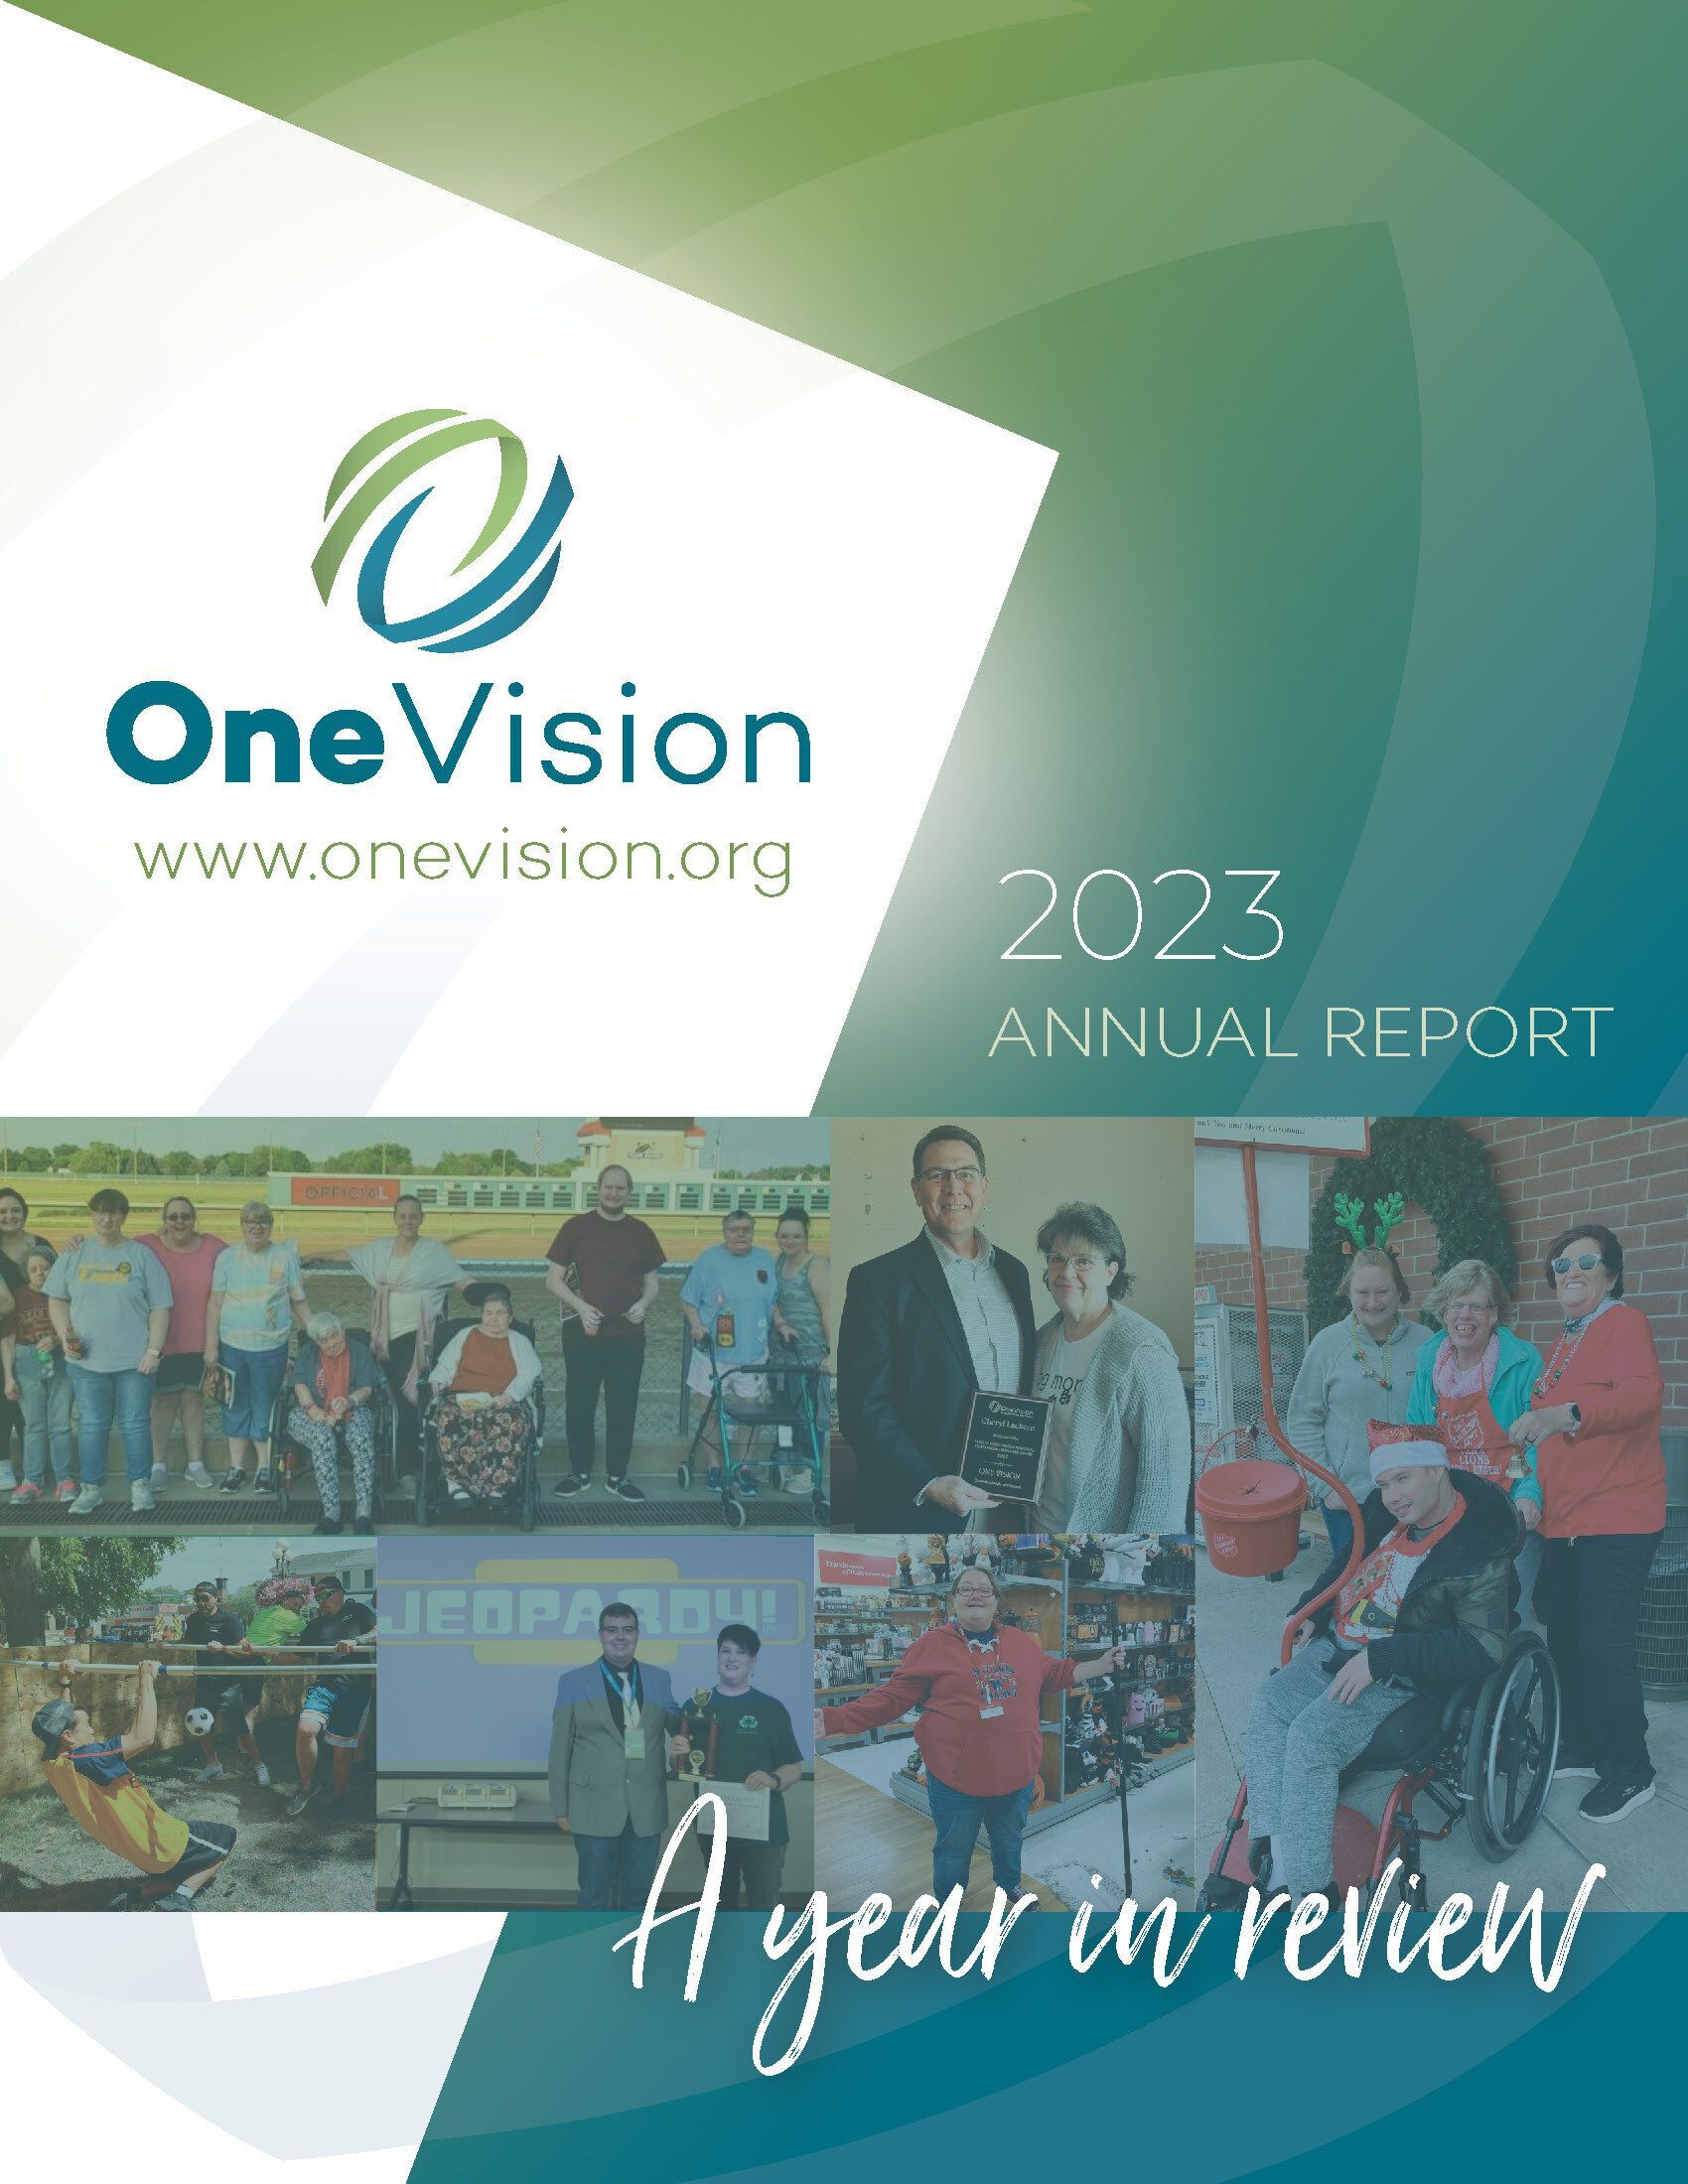 One Vision 2023 Annual Report